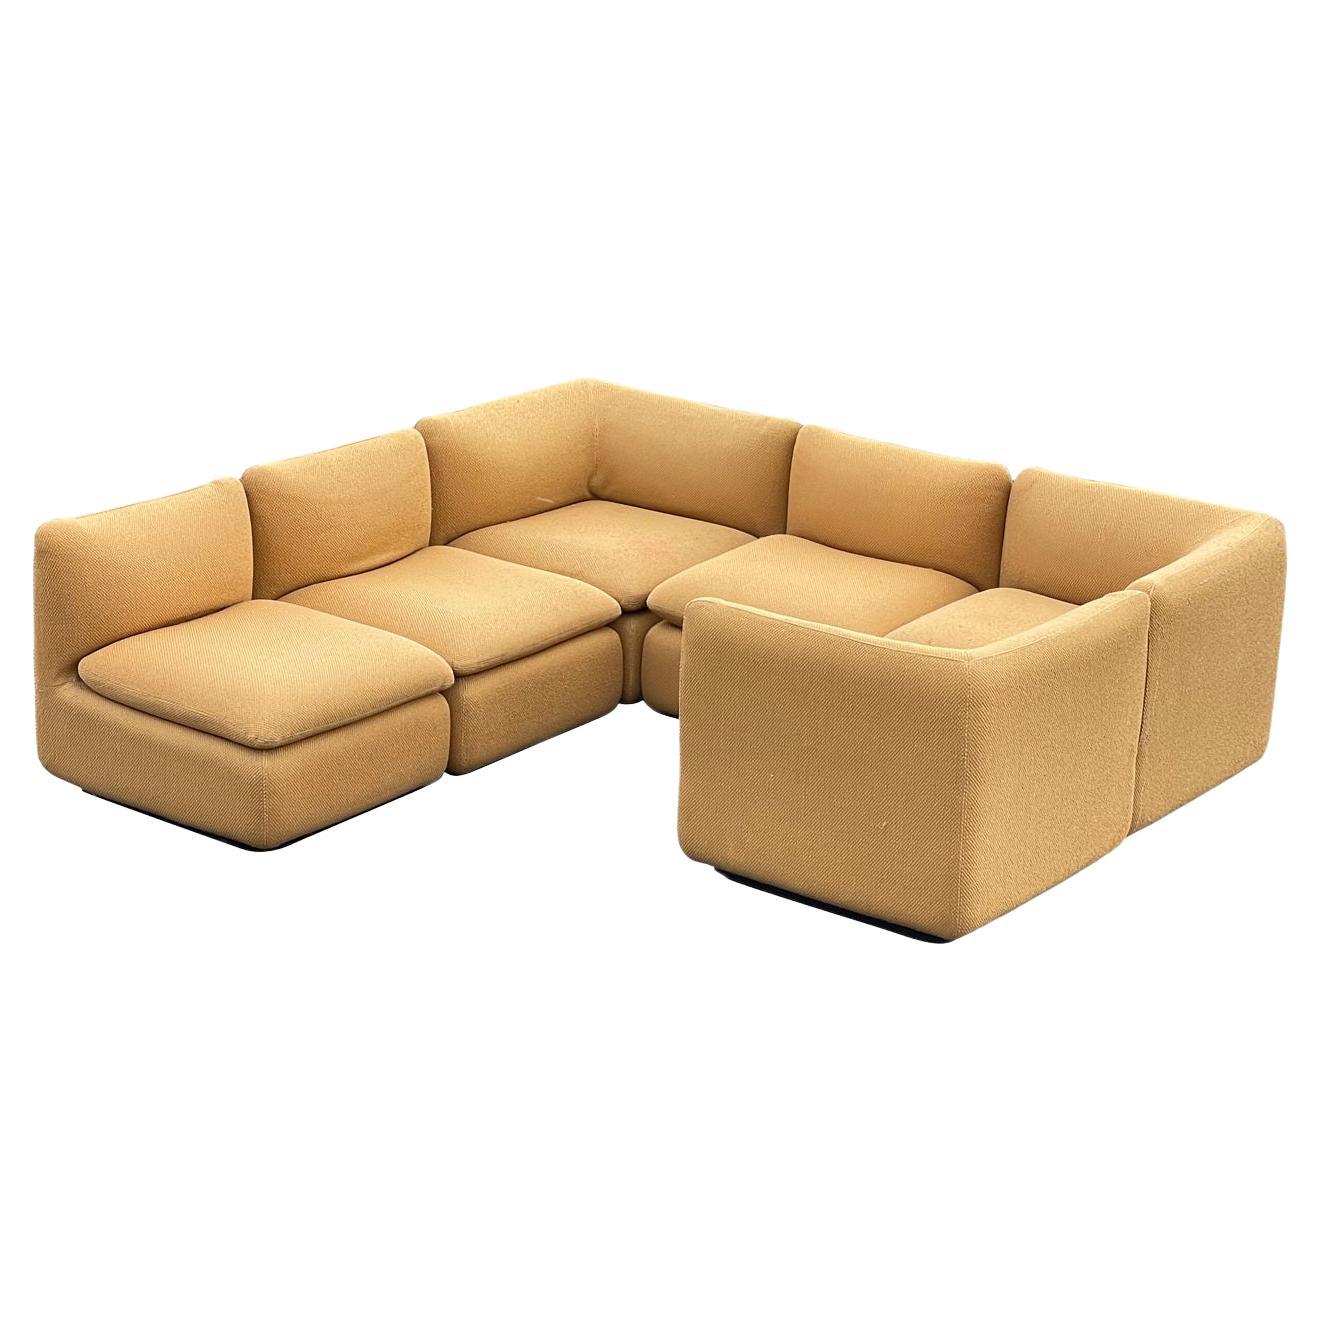 1980s Modular Ganging ELYSÉE Sofa Unit Sectional by Steelcase 